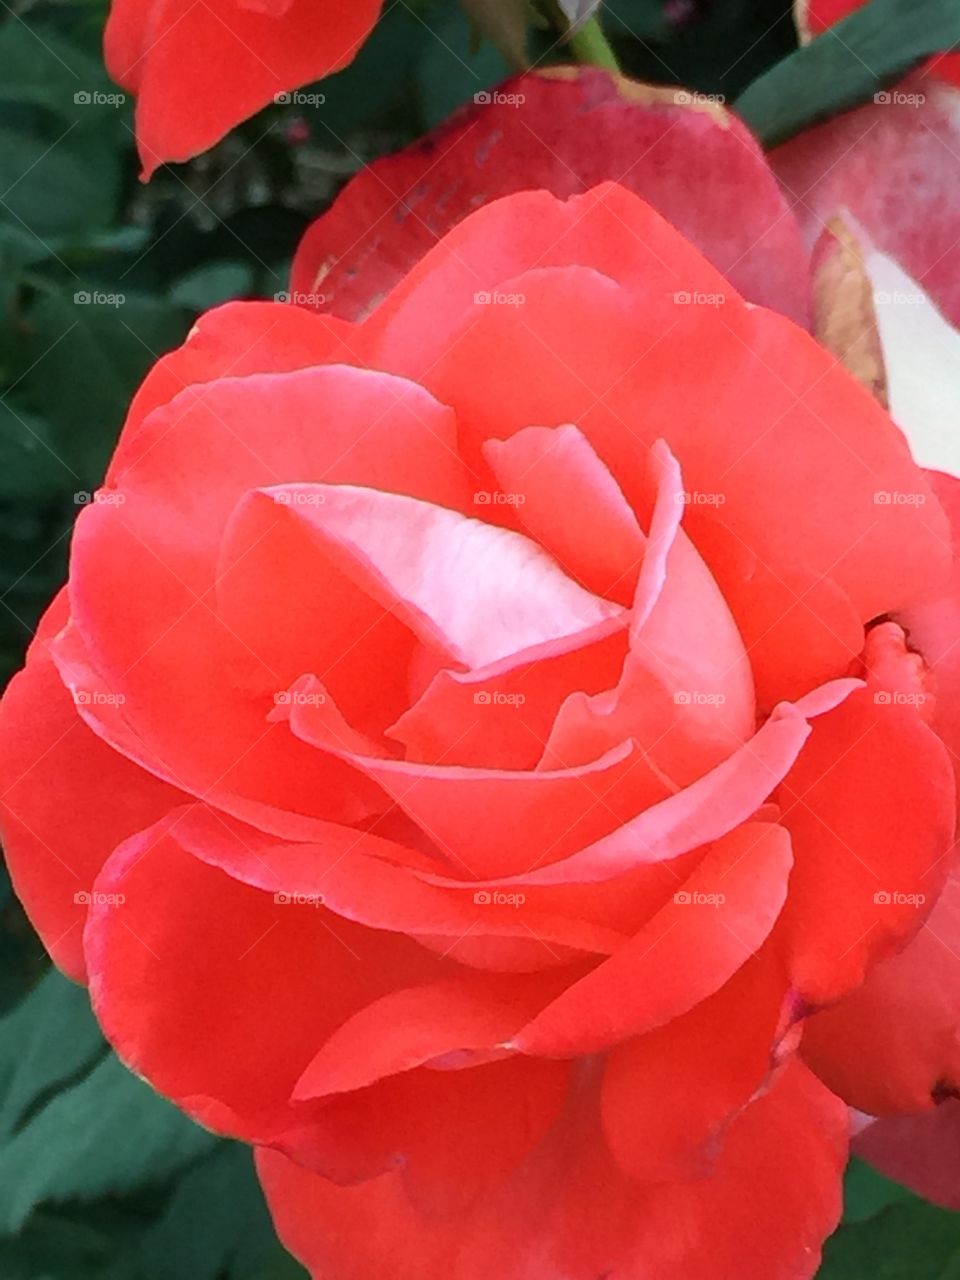 A pink rose growing in my backyard.